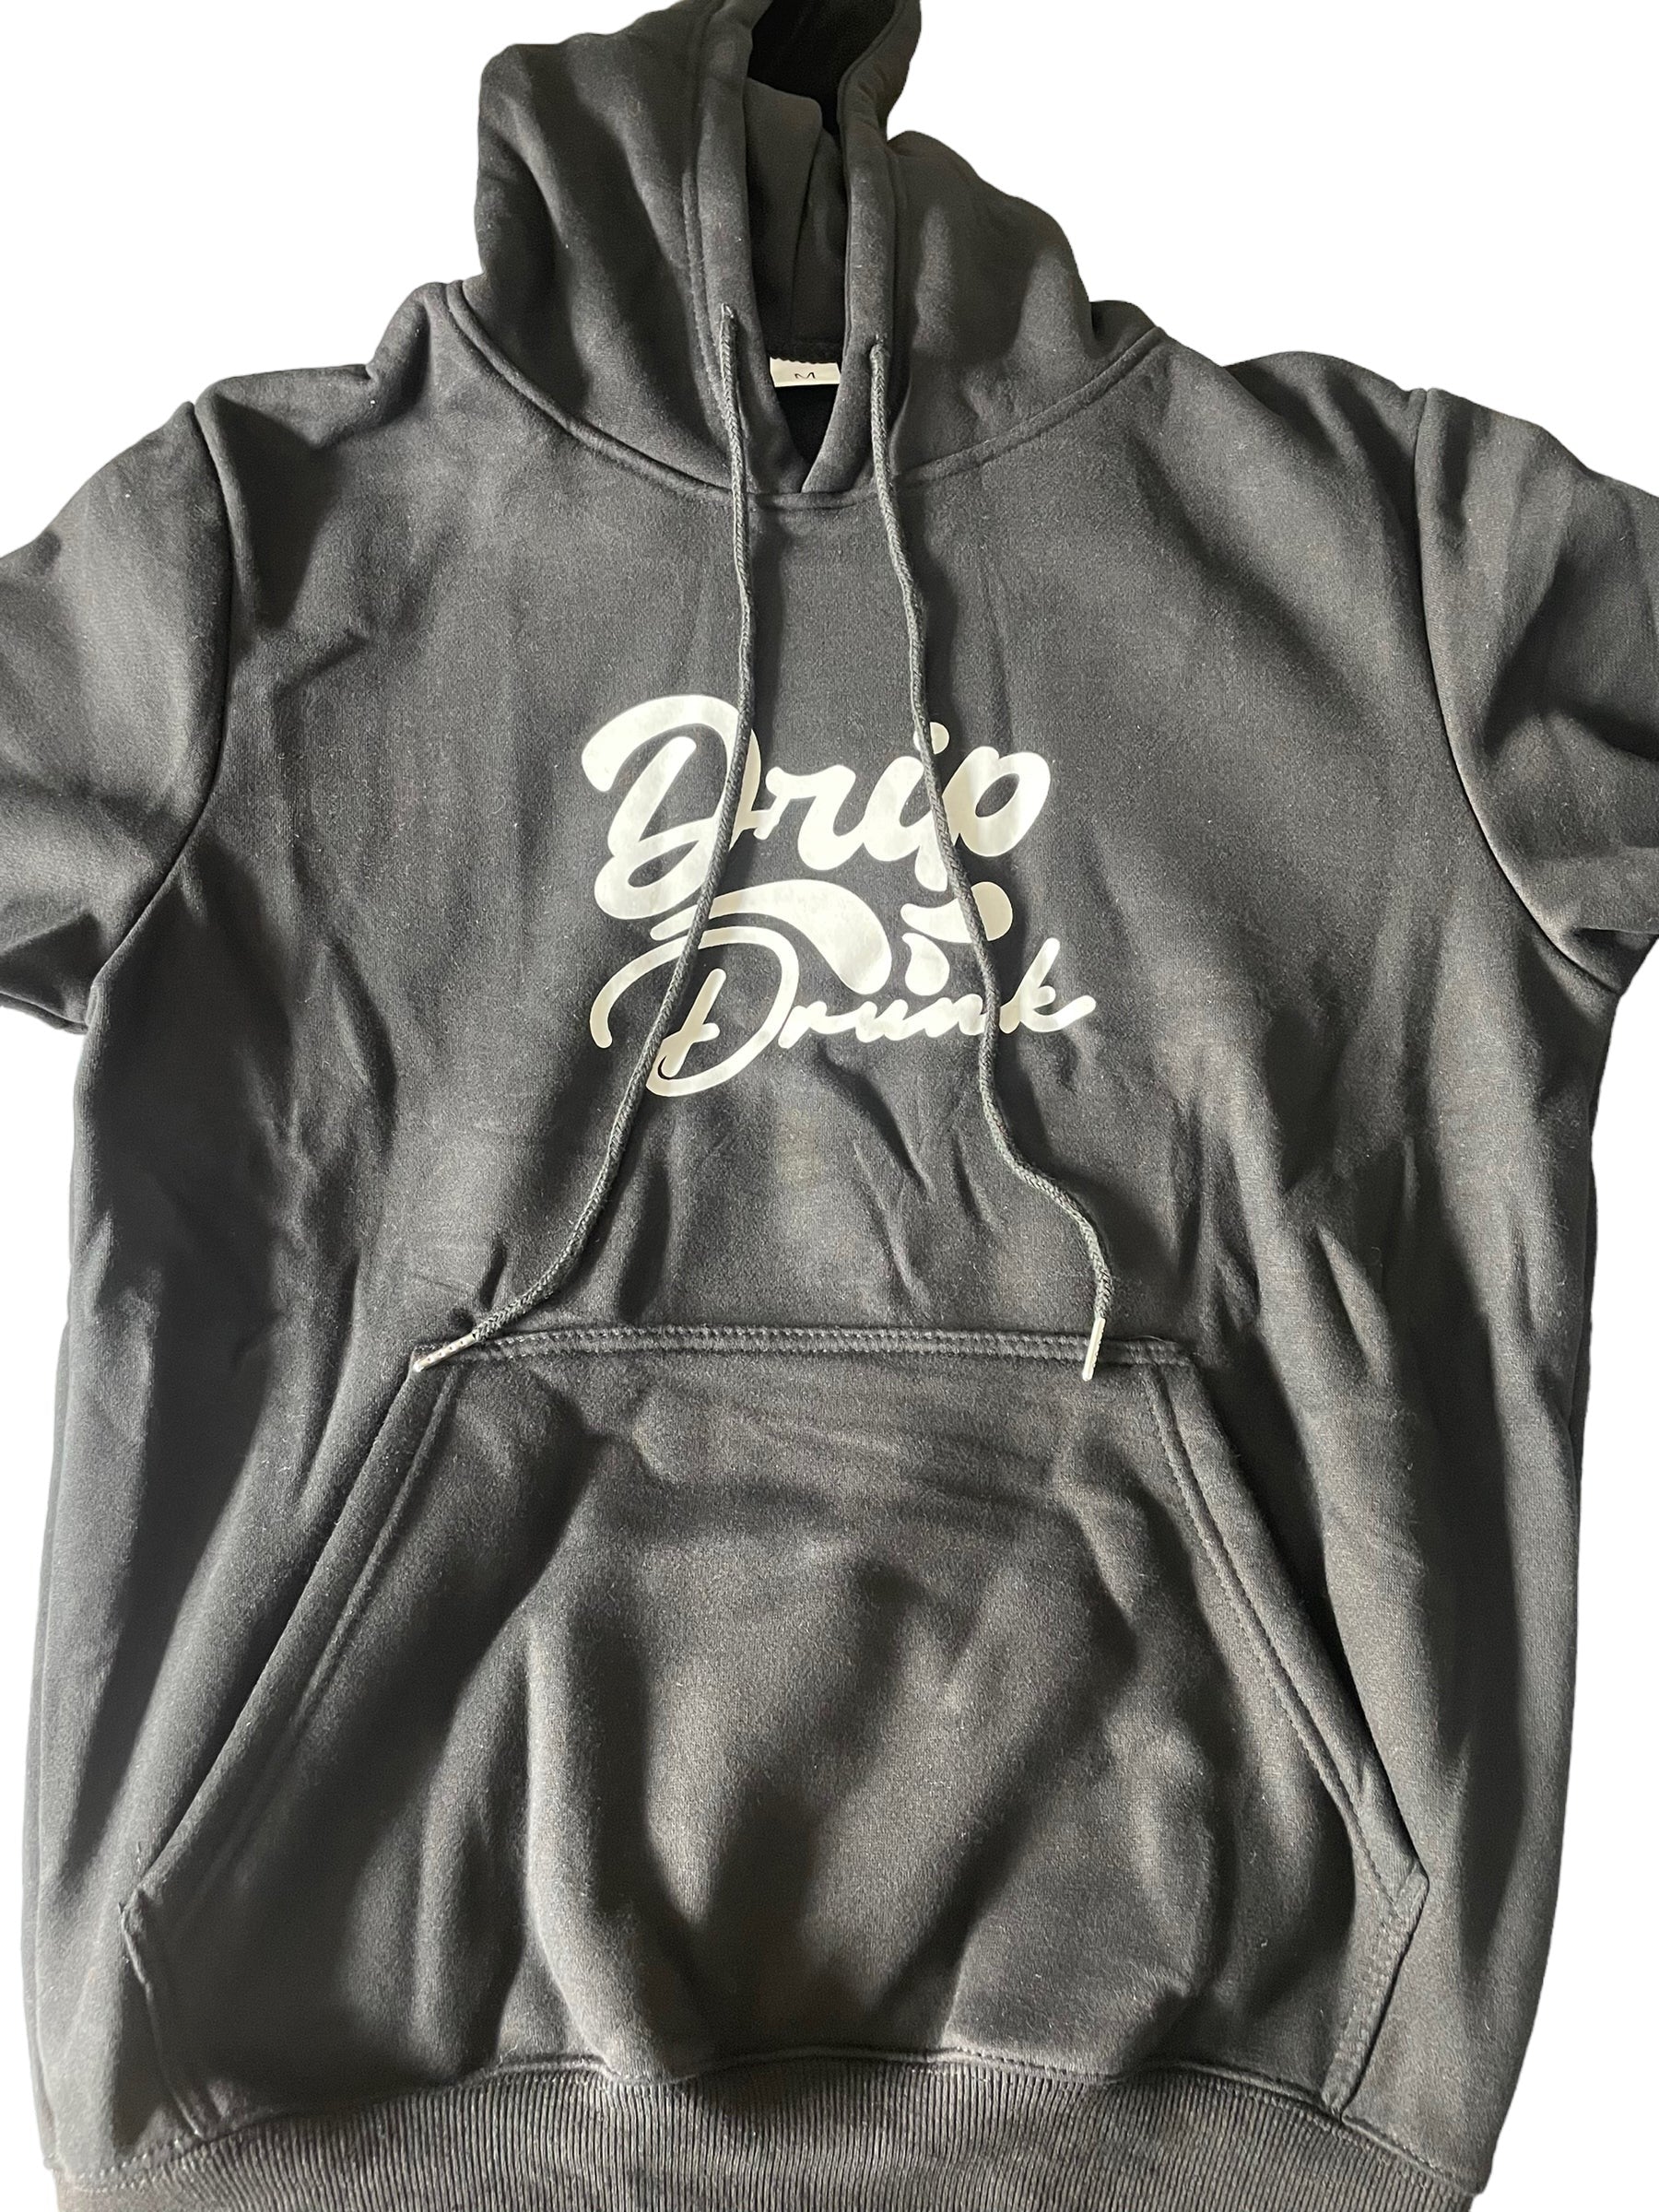 Daily Drip Tracksuit Set